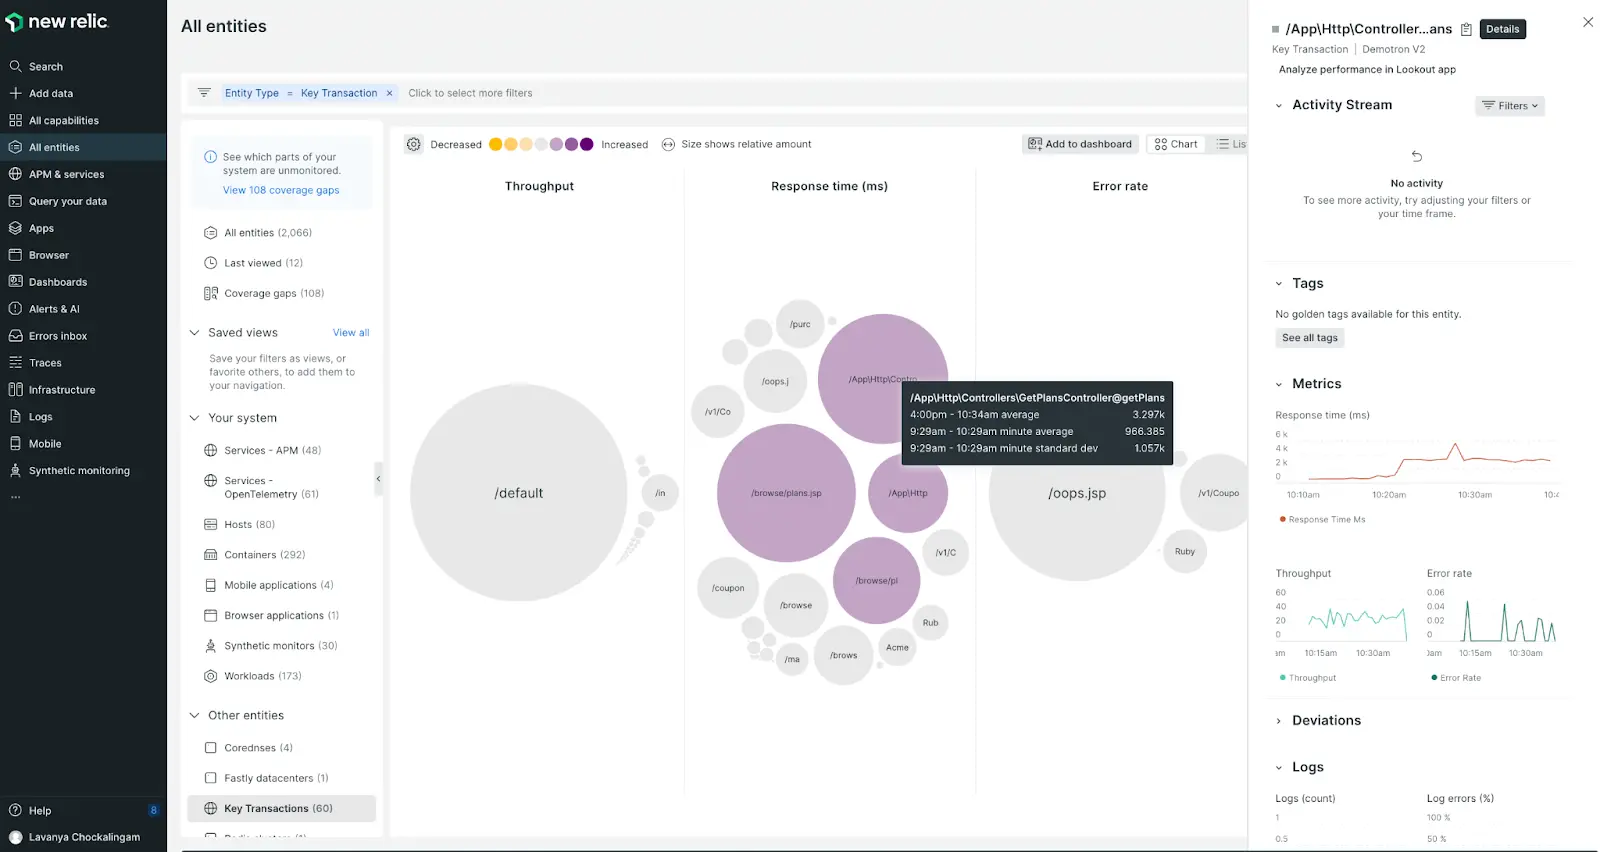 A screenshot depicting New Relic Lookout and key transactions.